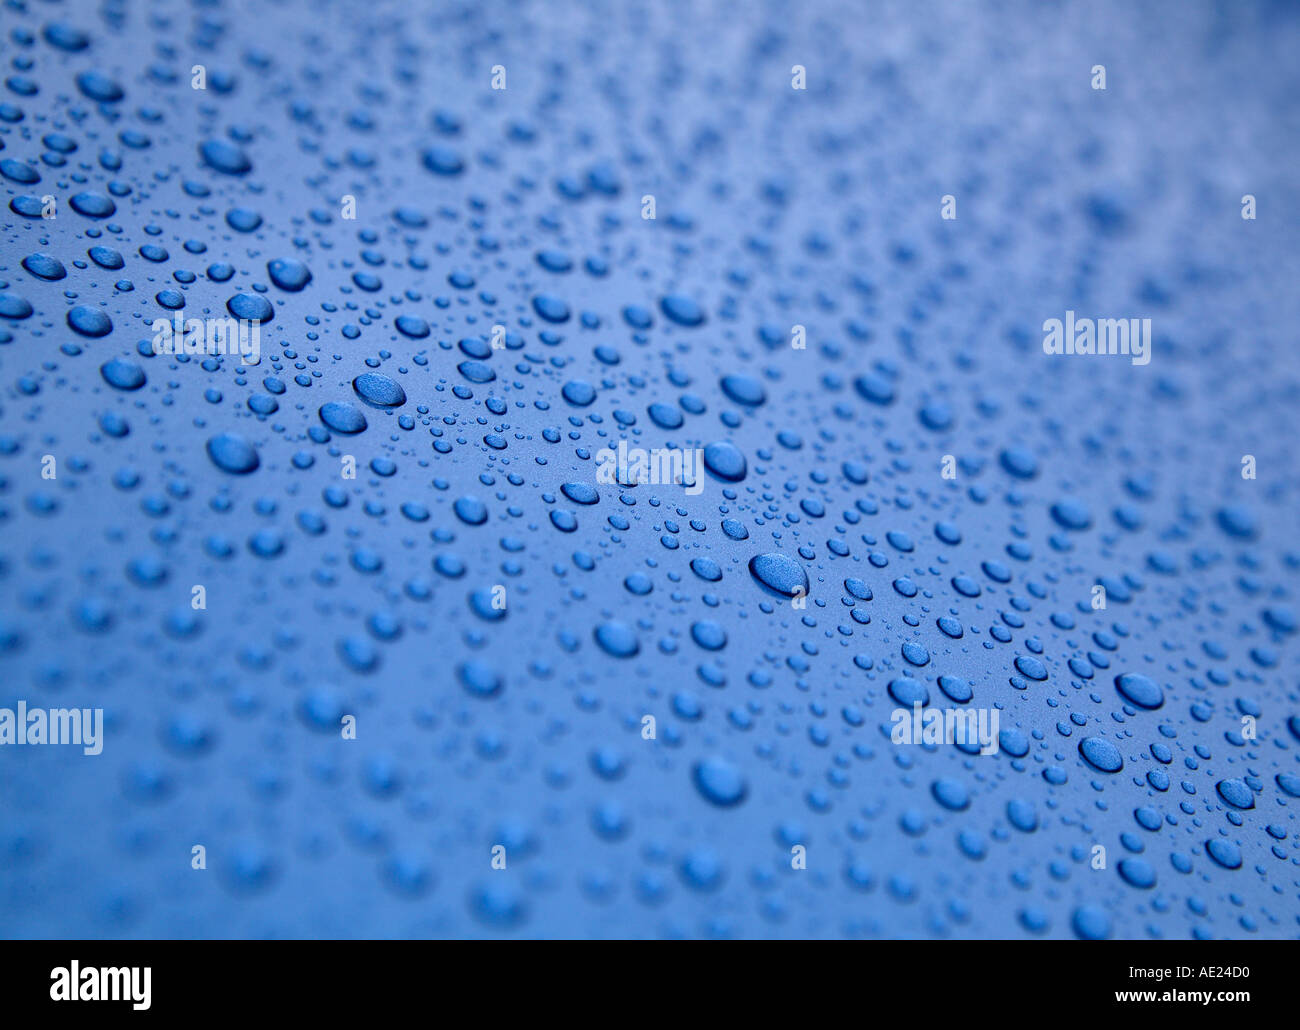 WATER DROPLETS ON BLUE METALLIC SURFACE Stock Photo